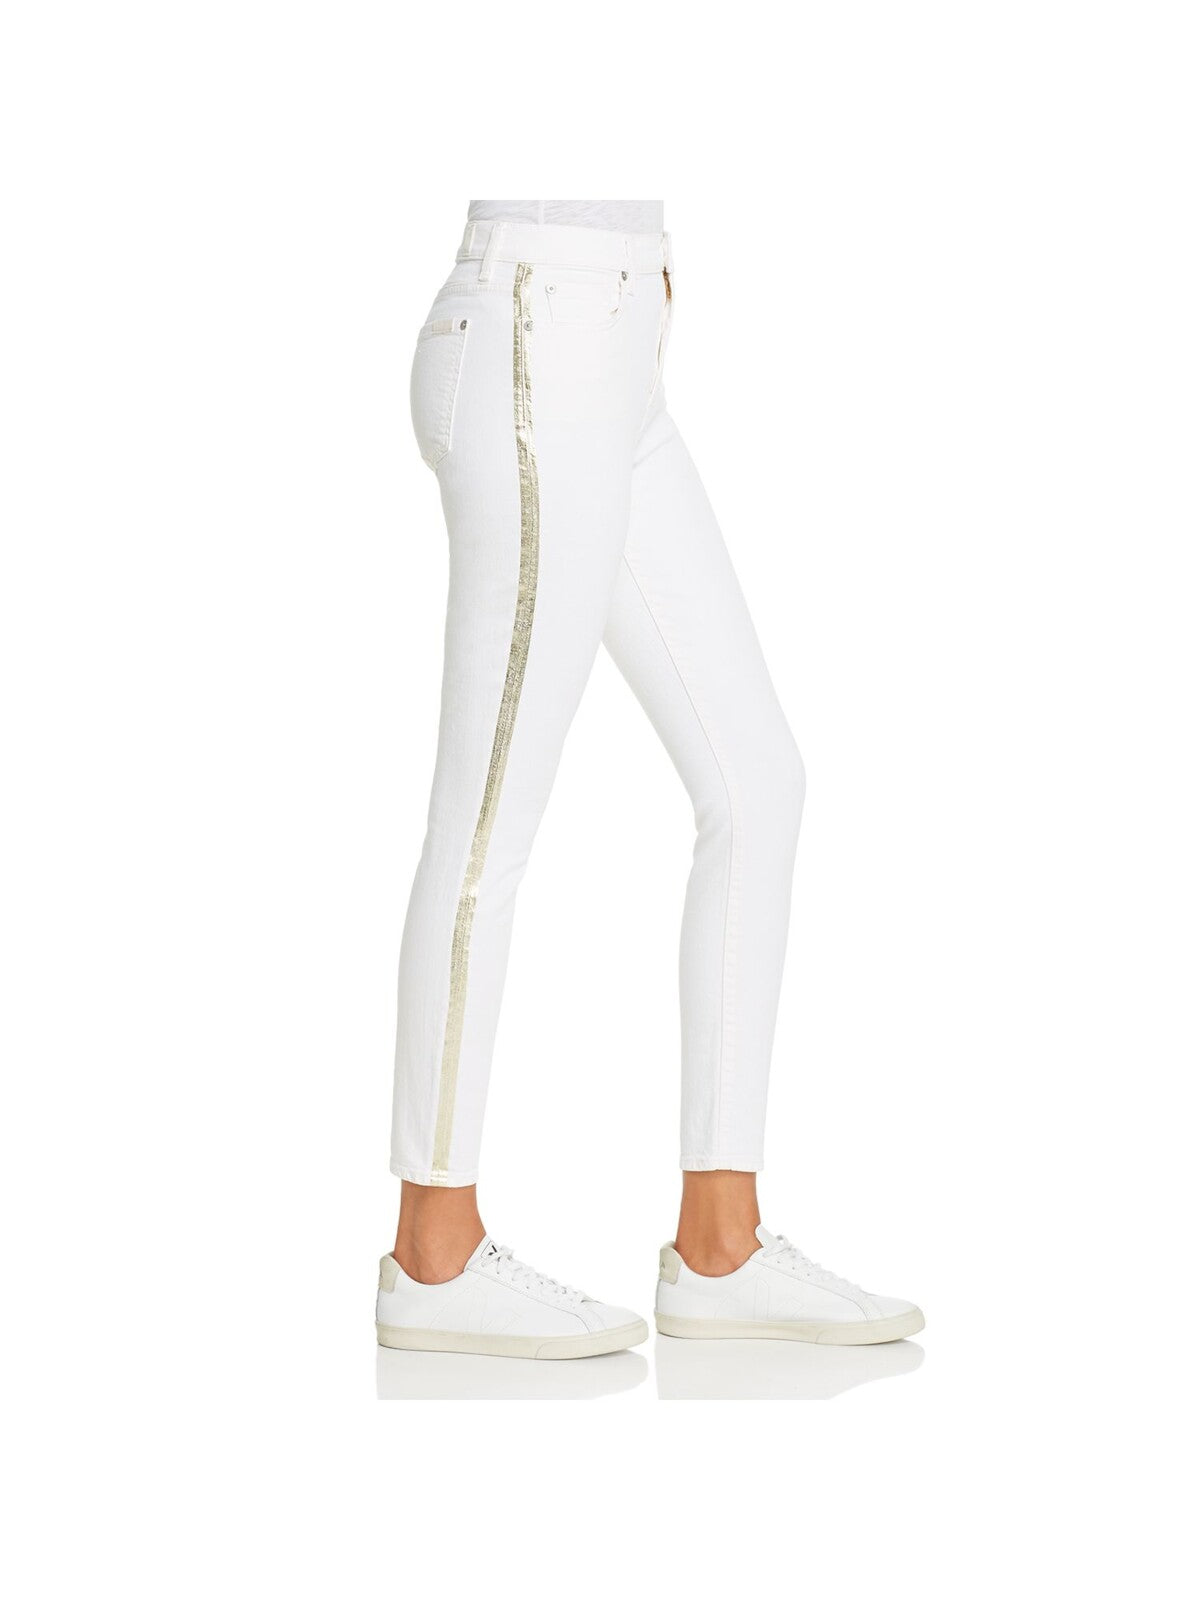 7 FOR ALL MANKIND Womens Ivory Zippered Pocketed Metallic Ankle Skinny High Waist Jeans 26